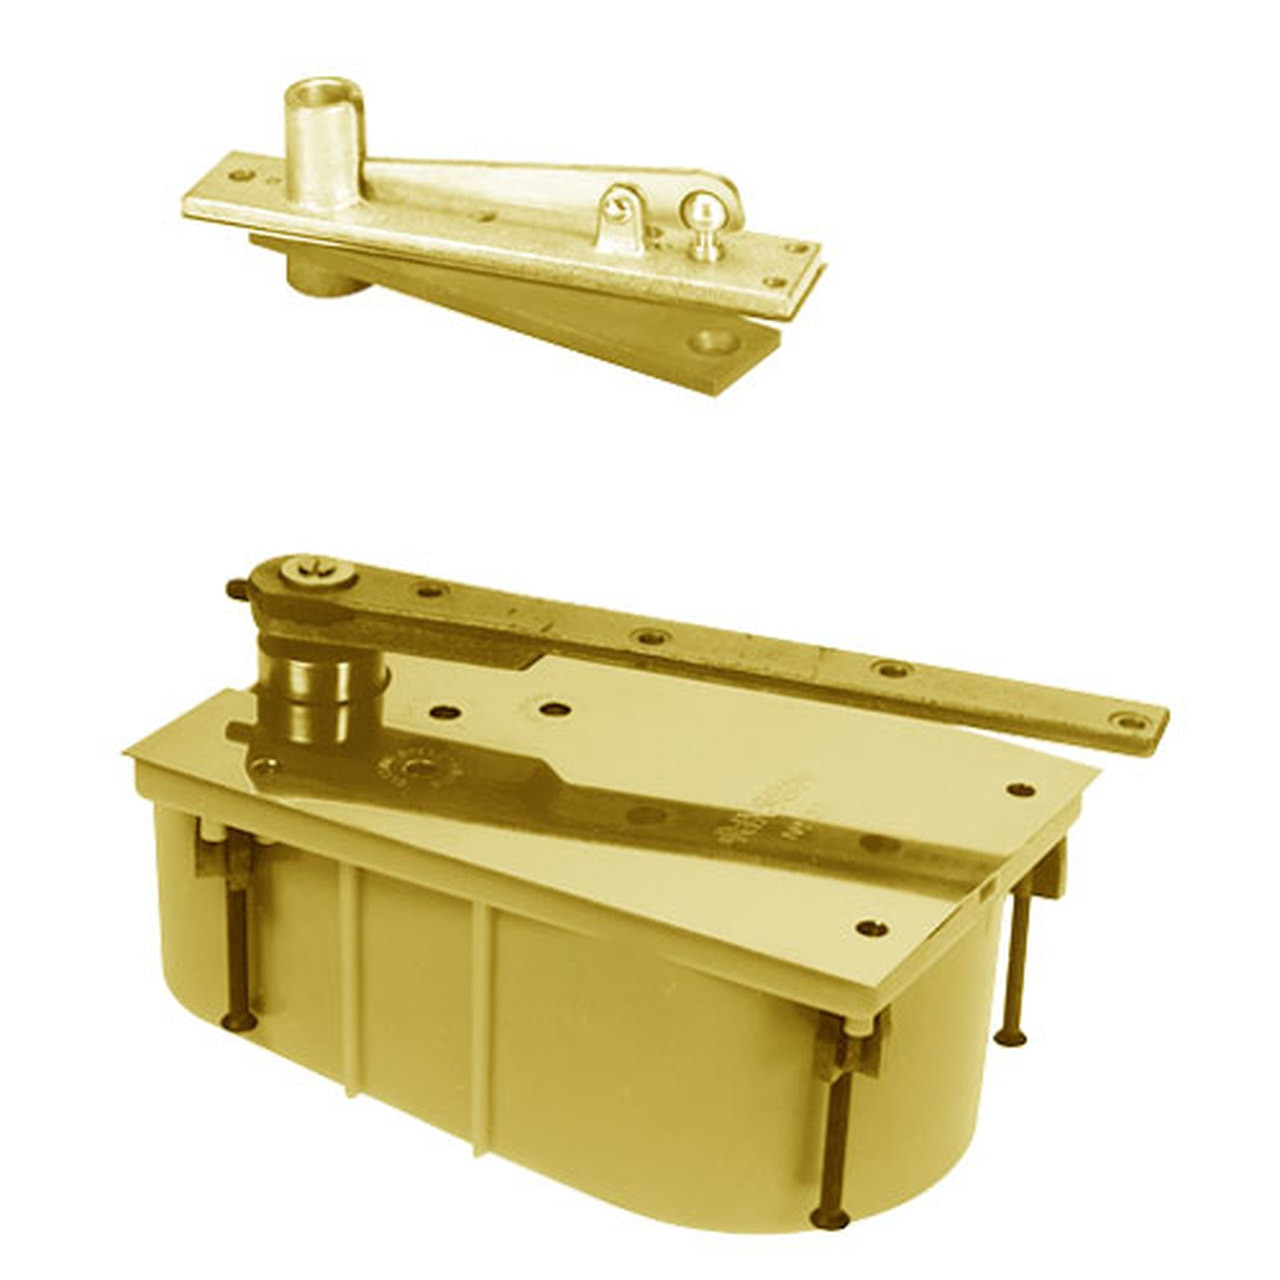 28-90S-554-LFP-LCC-LH-605 Rixson 28 Series Heavy Duty Single Acting Center Hung Floor Closer with Concealed Arm in Bright Brass Finish